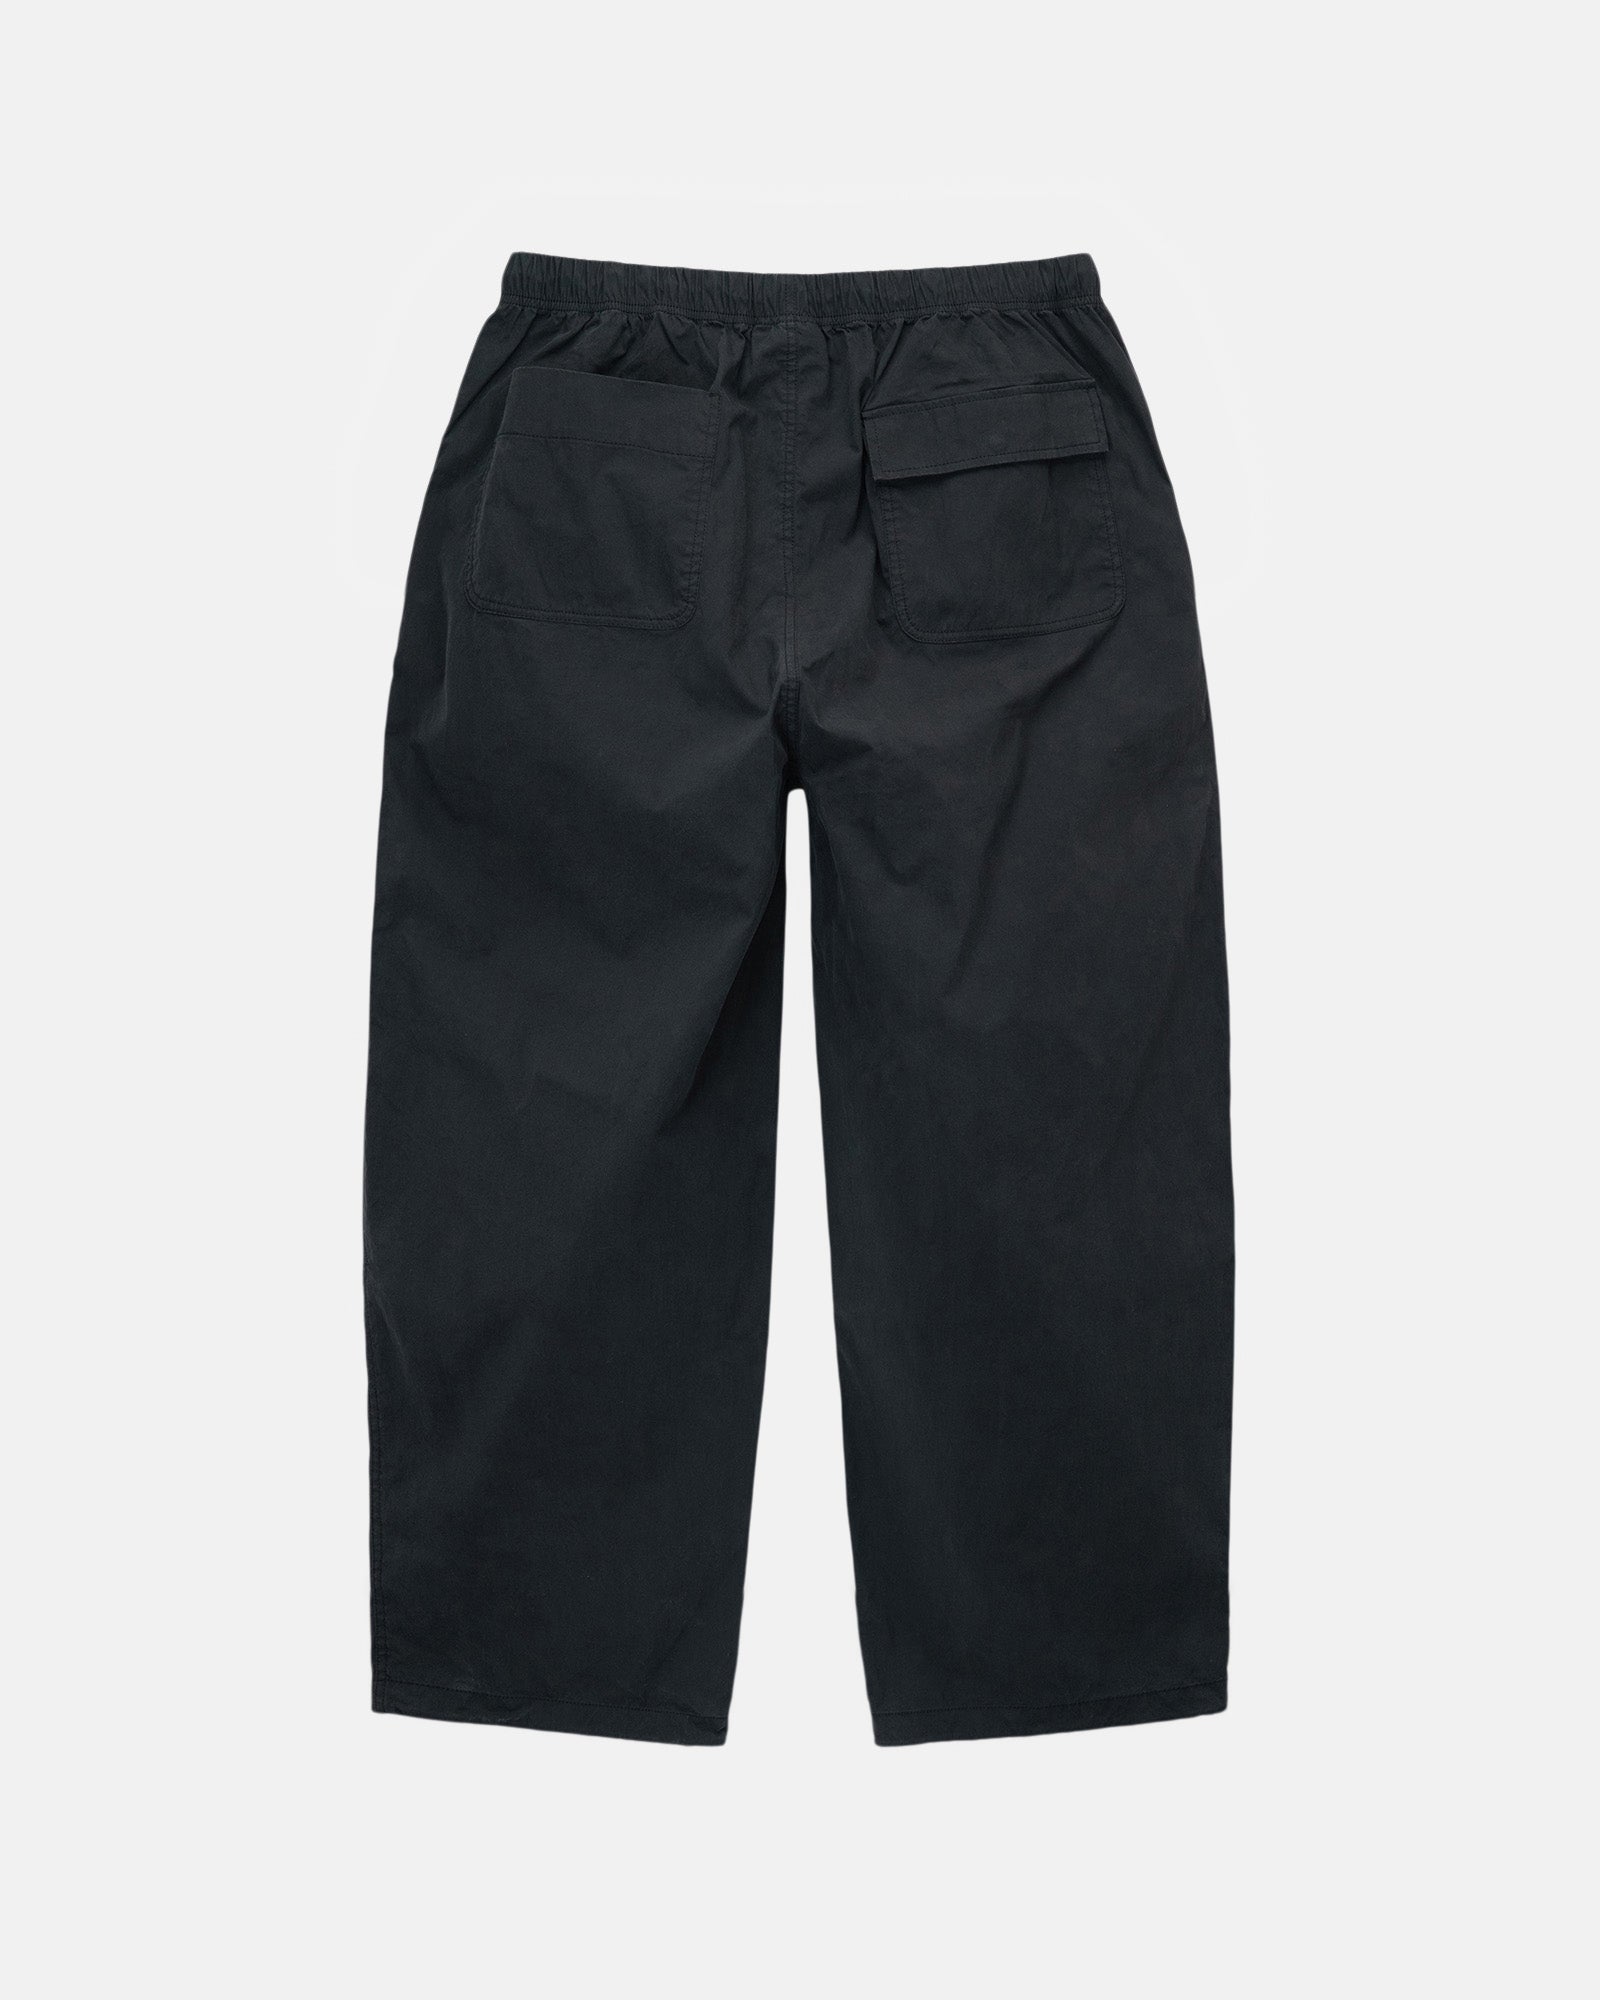 stussystussy nyco over trousers XS black